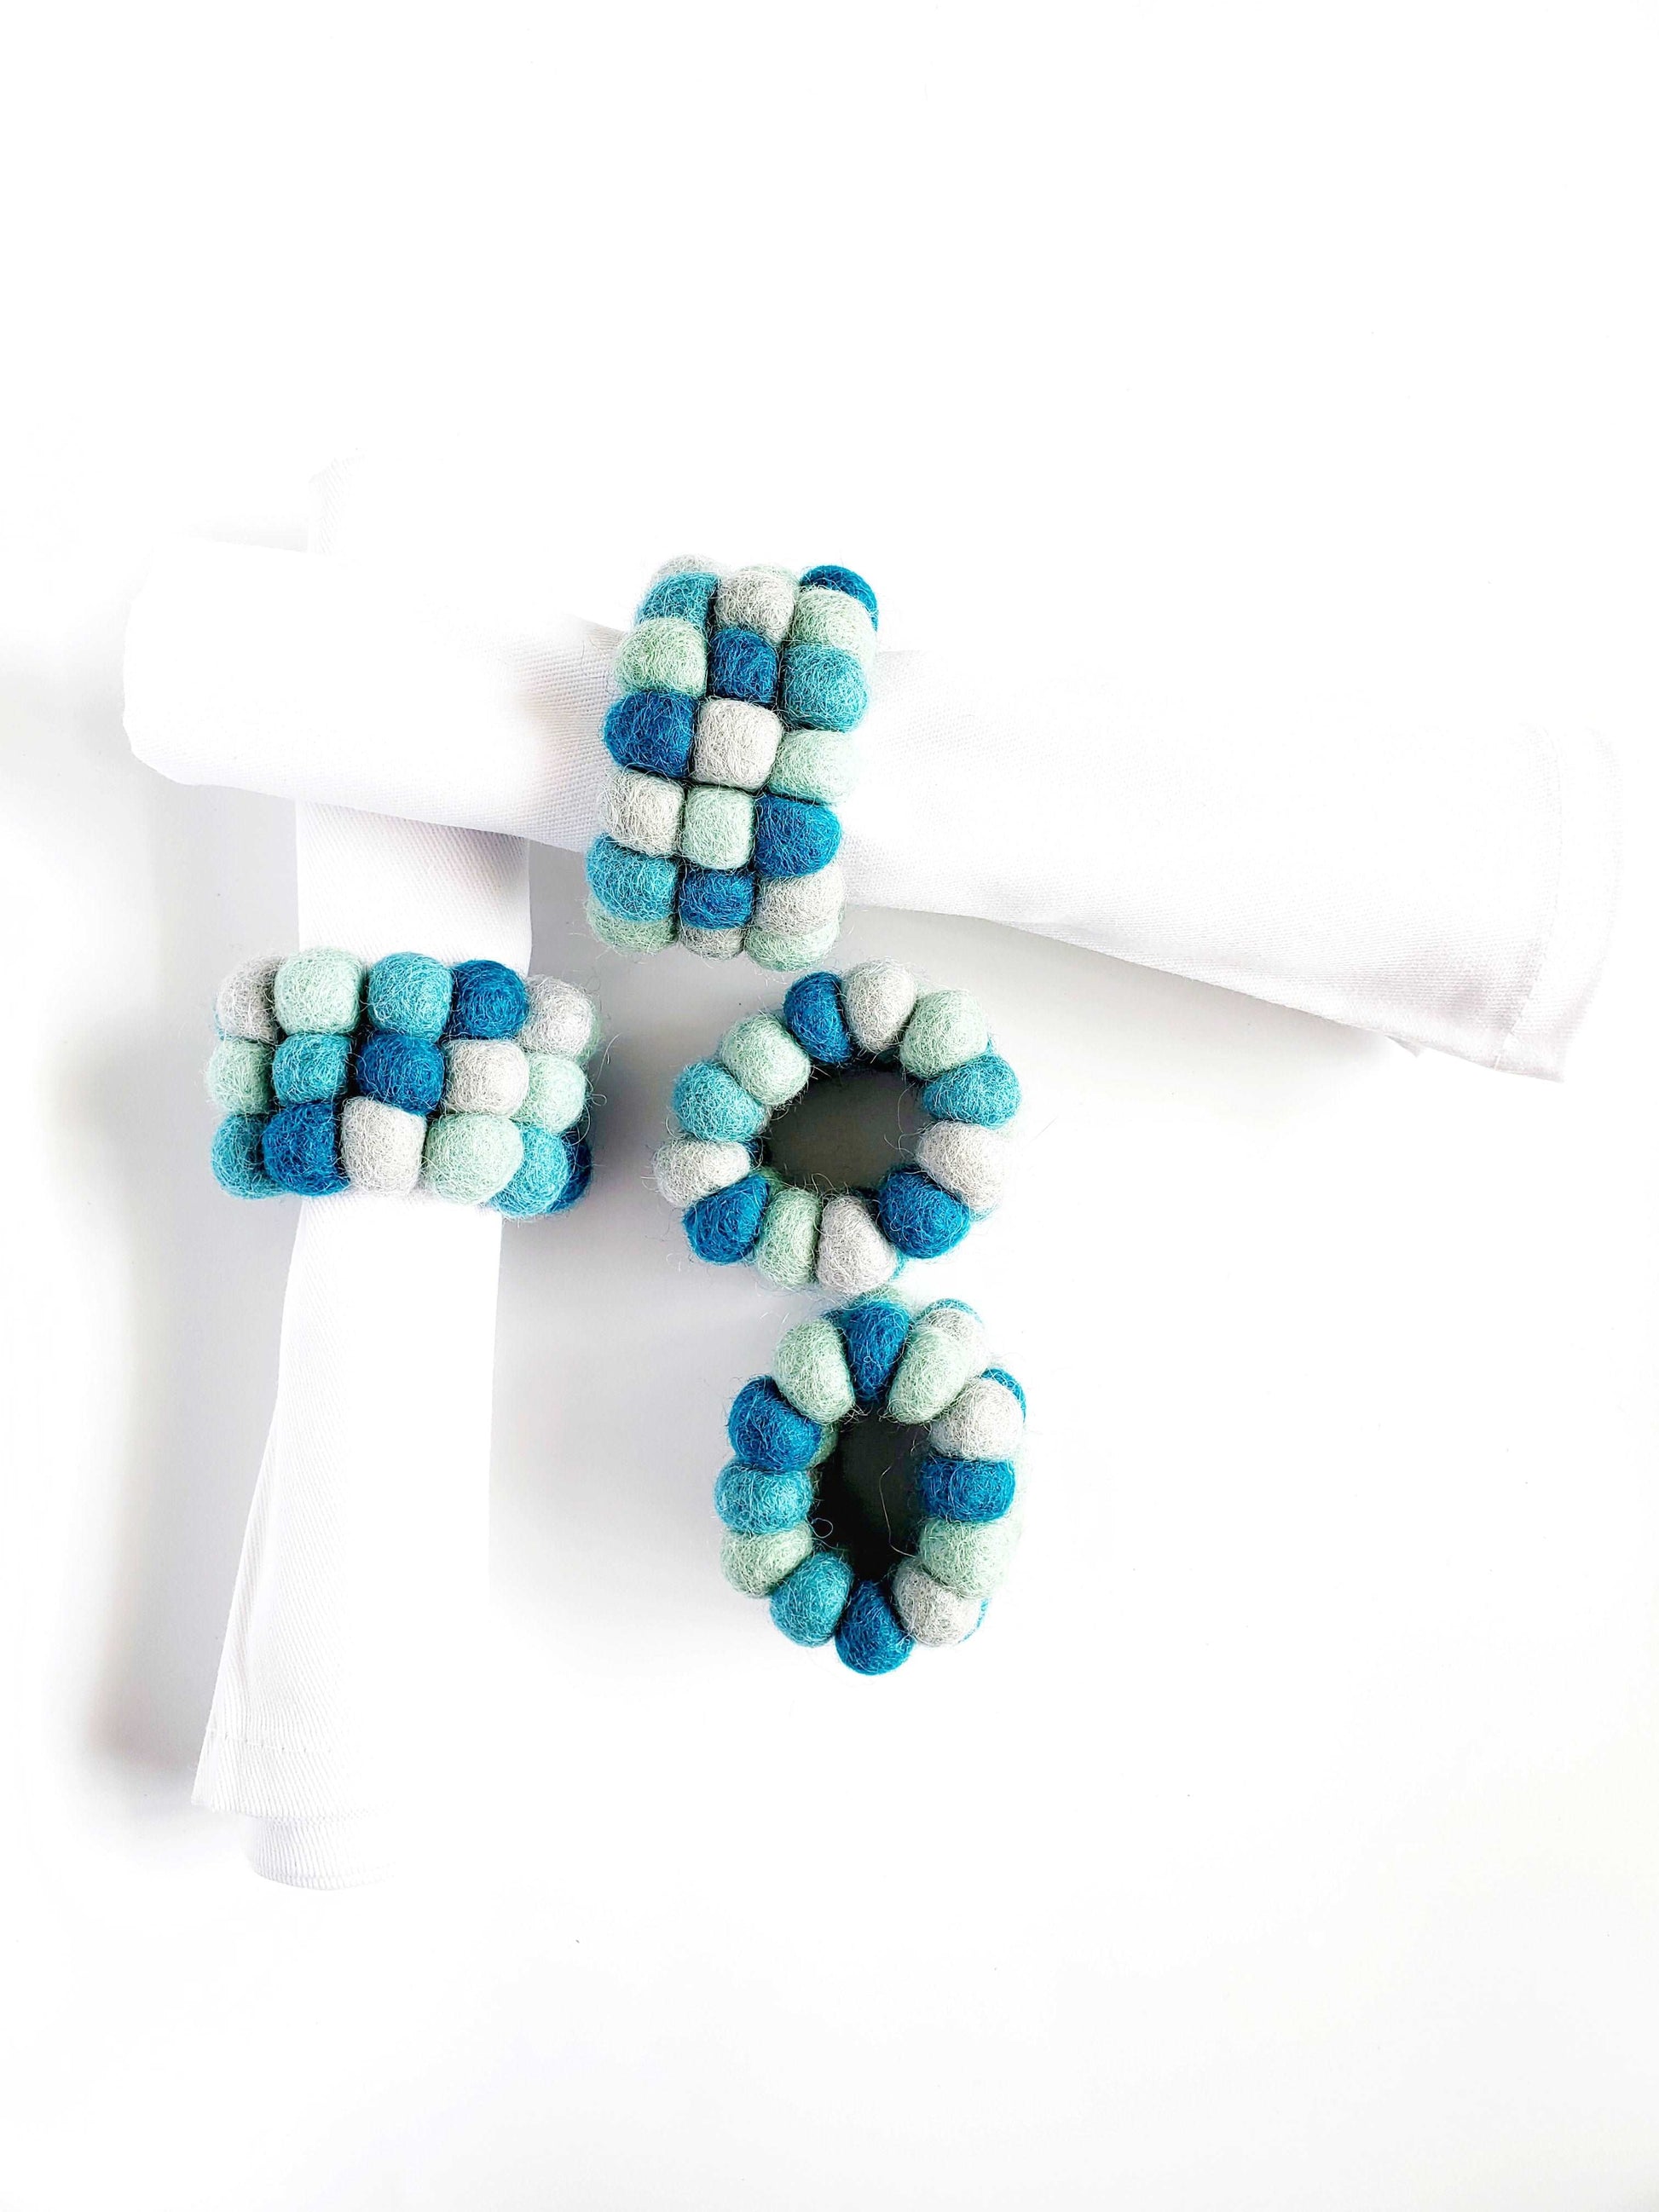 This Global Groove Life, handmade, ethical, fair trade, eco-friendly, sustainable, felt Ocean Sky Blue Napkin Ring set was created by artisans in Kathmandu Nepal and will bring colorful warmth and functionality to your table top.